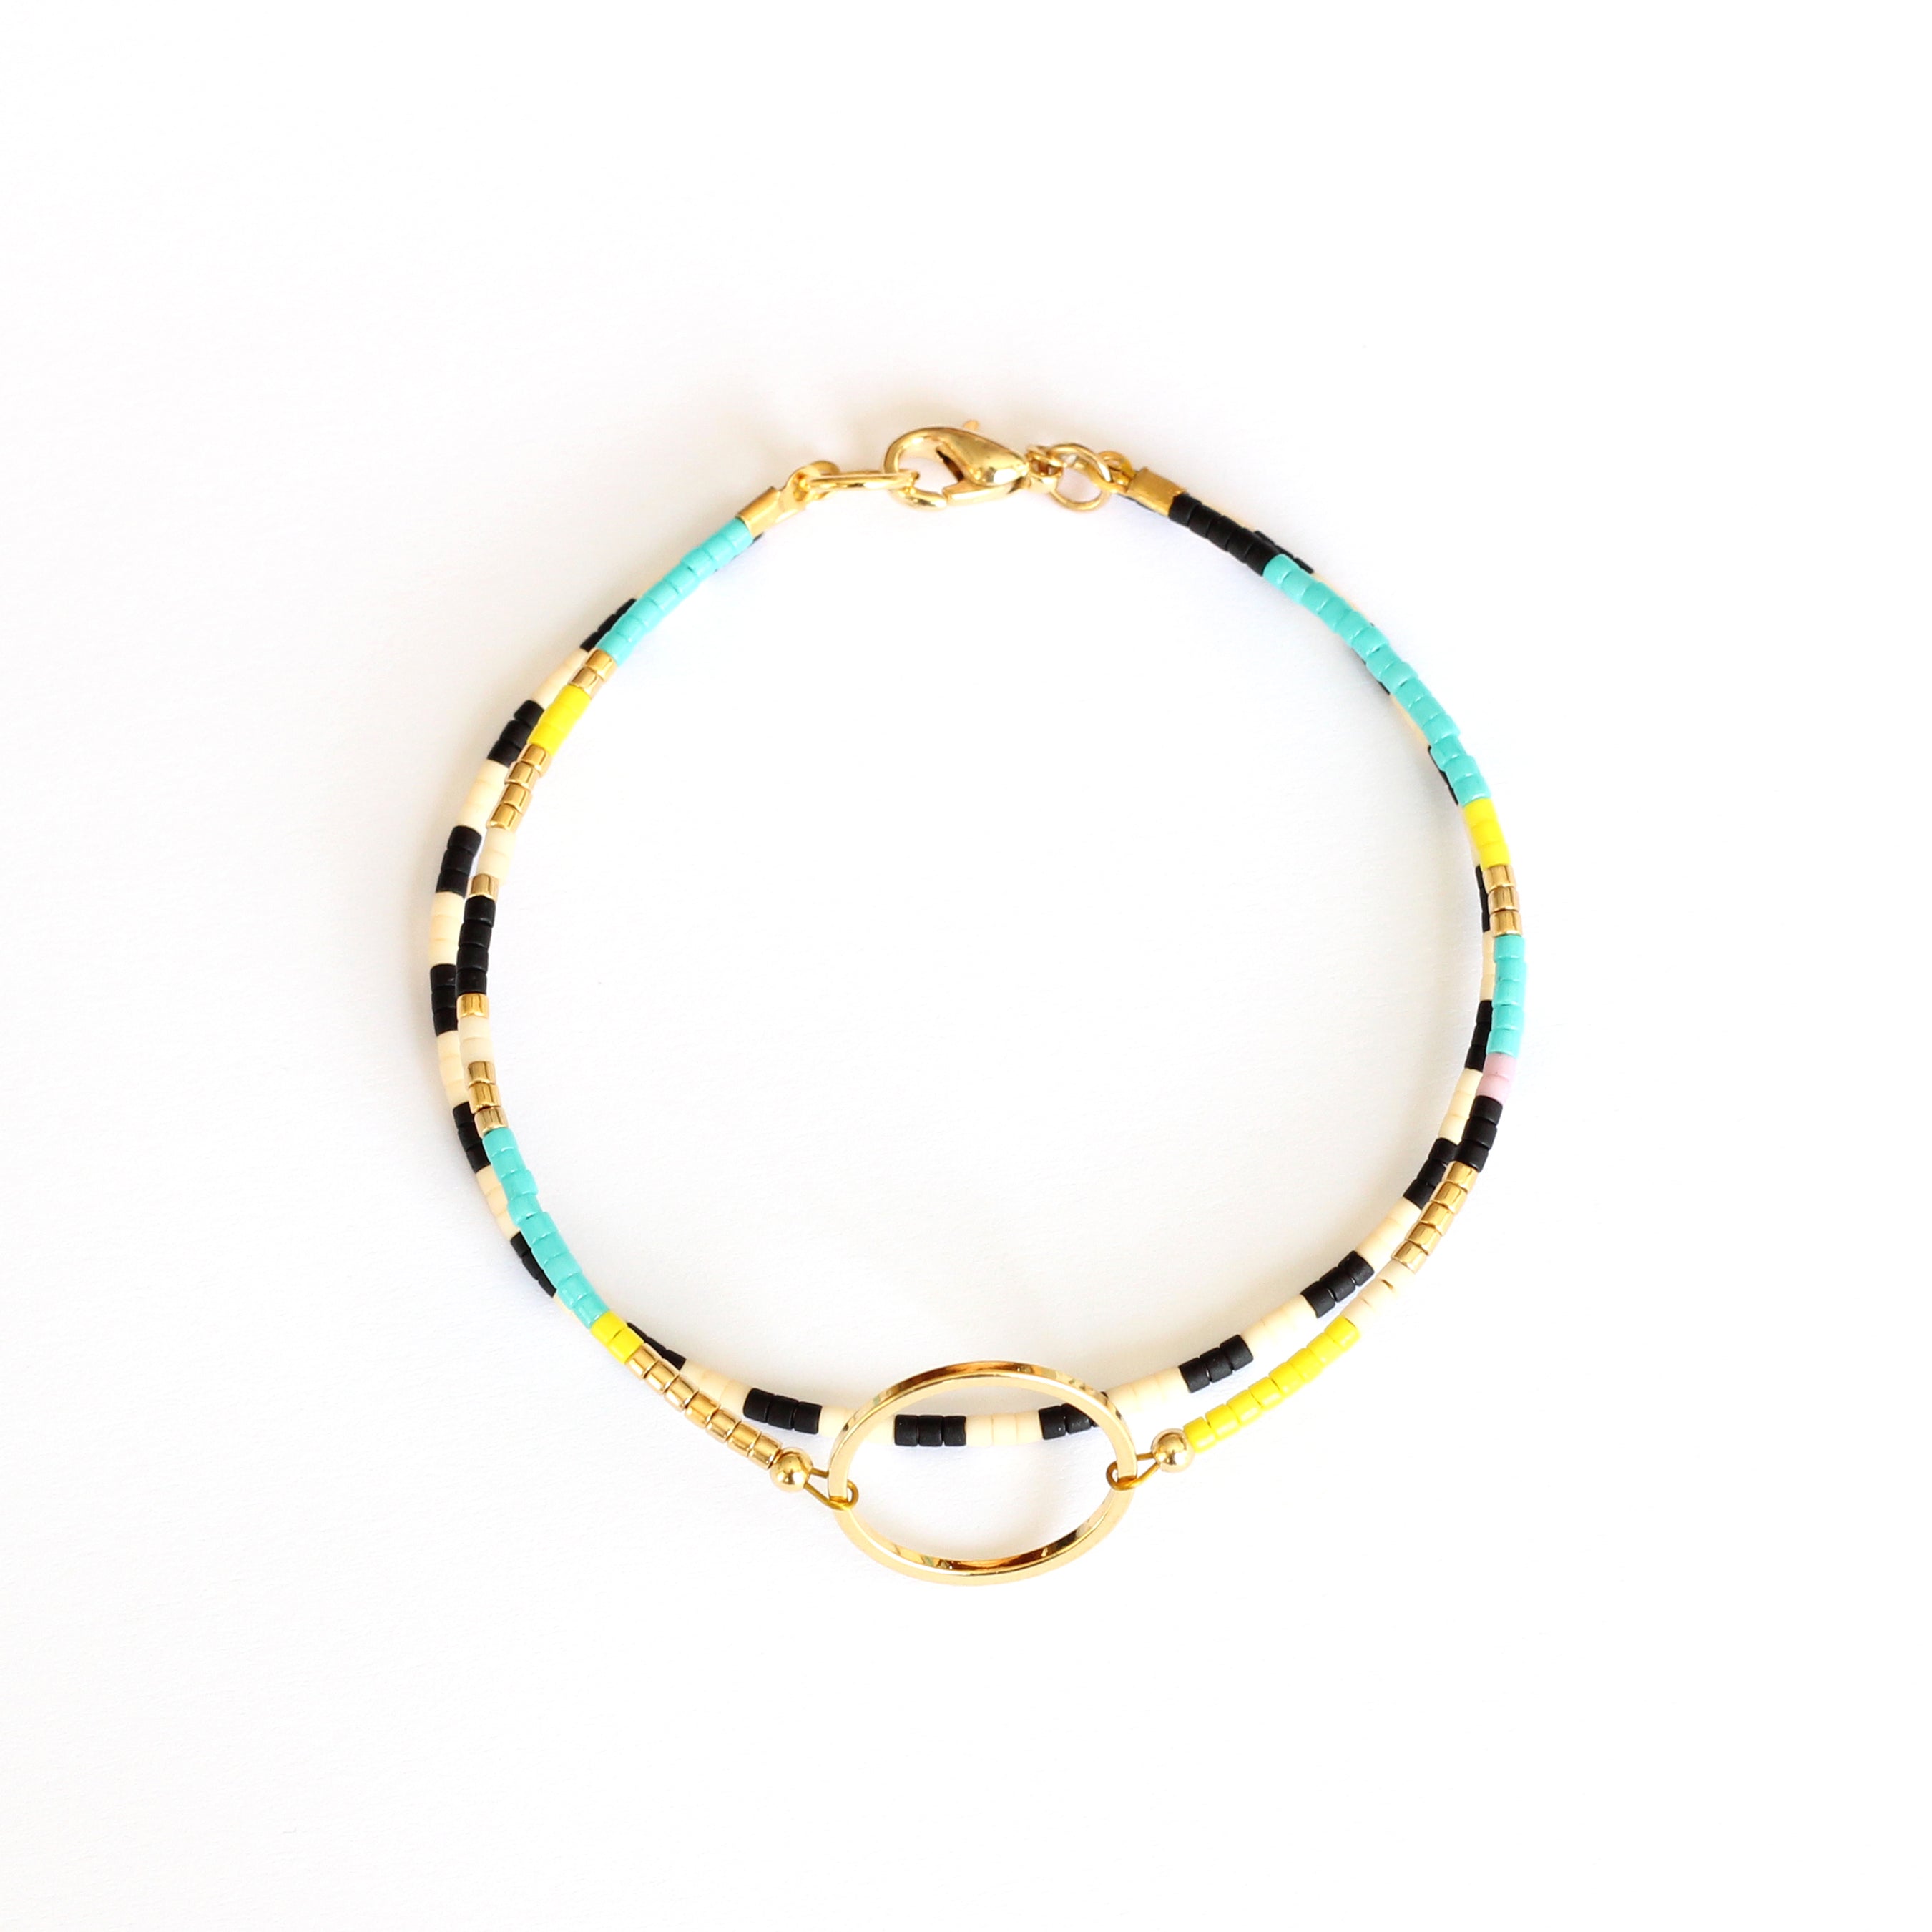 Tribal African Style Dainty Beaded Gold Circle Bracelet